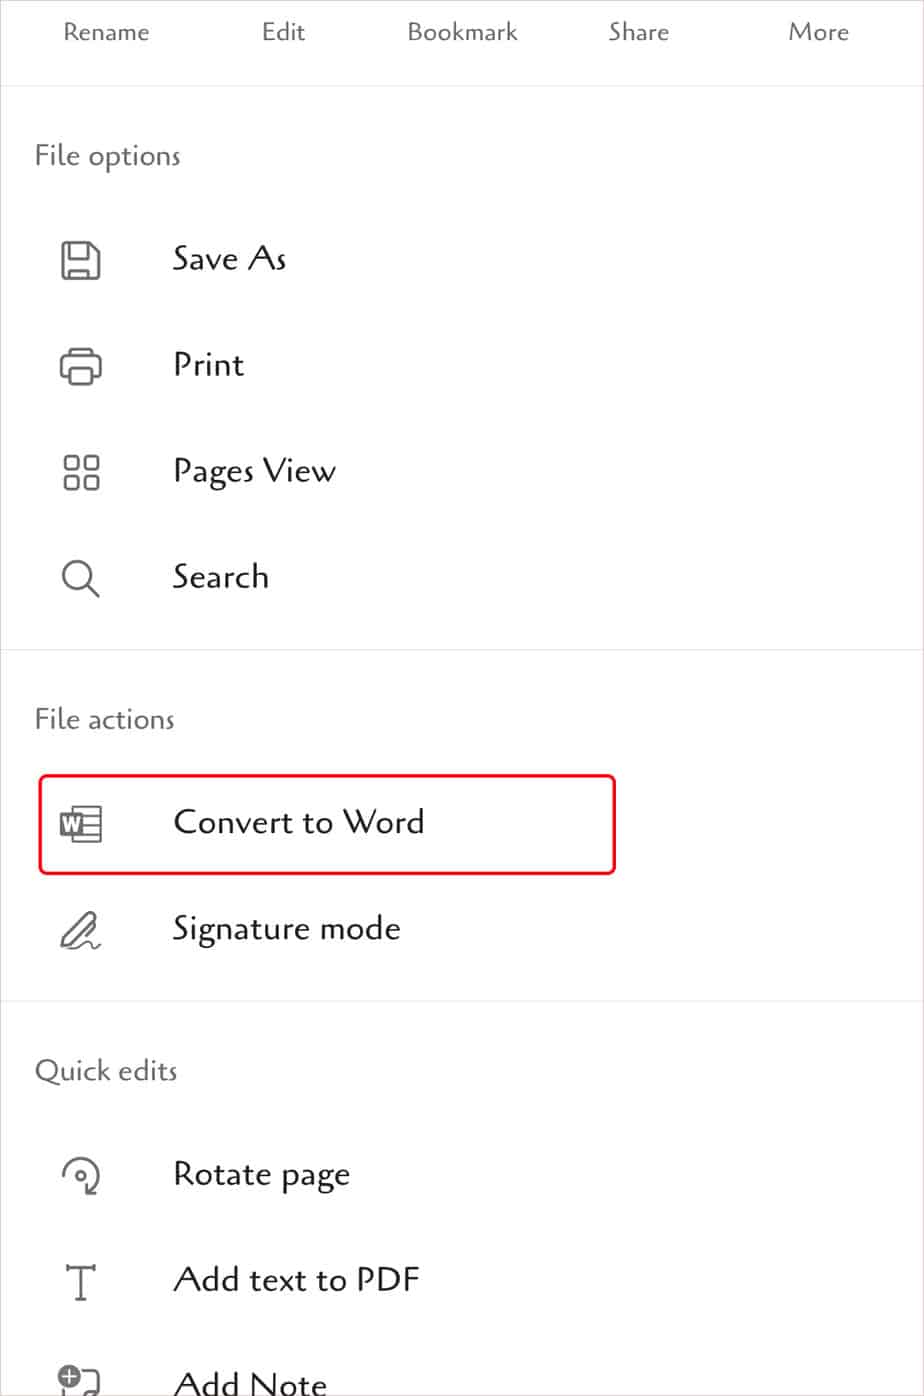 convert-to-word-in-office'